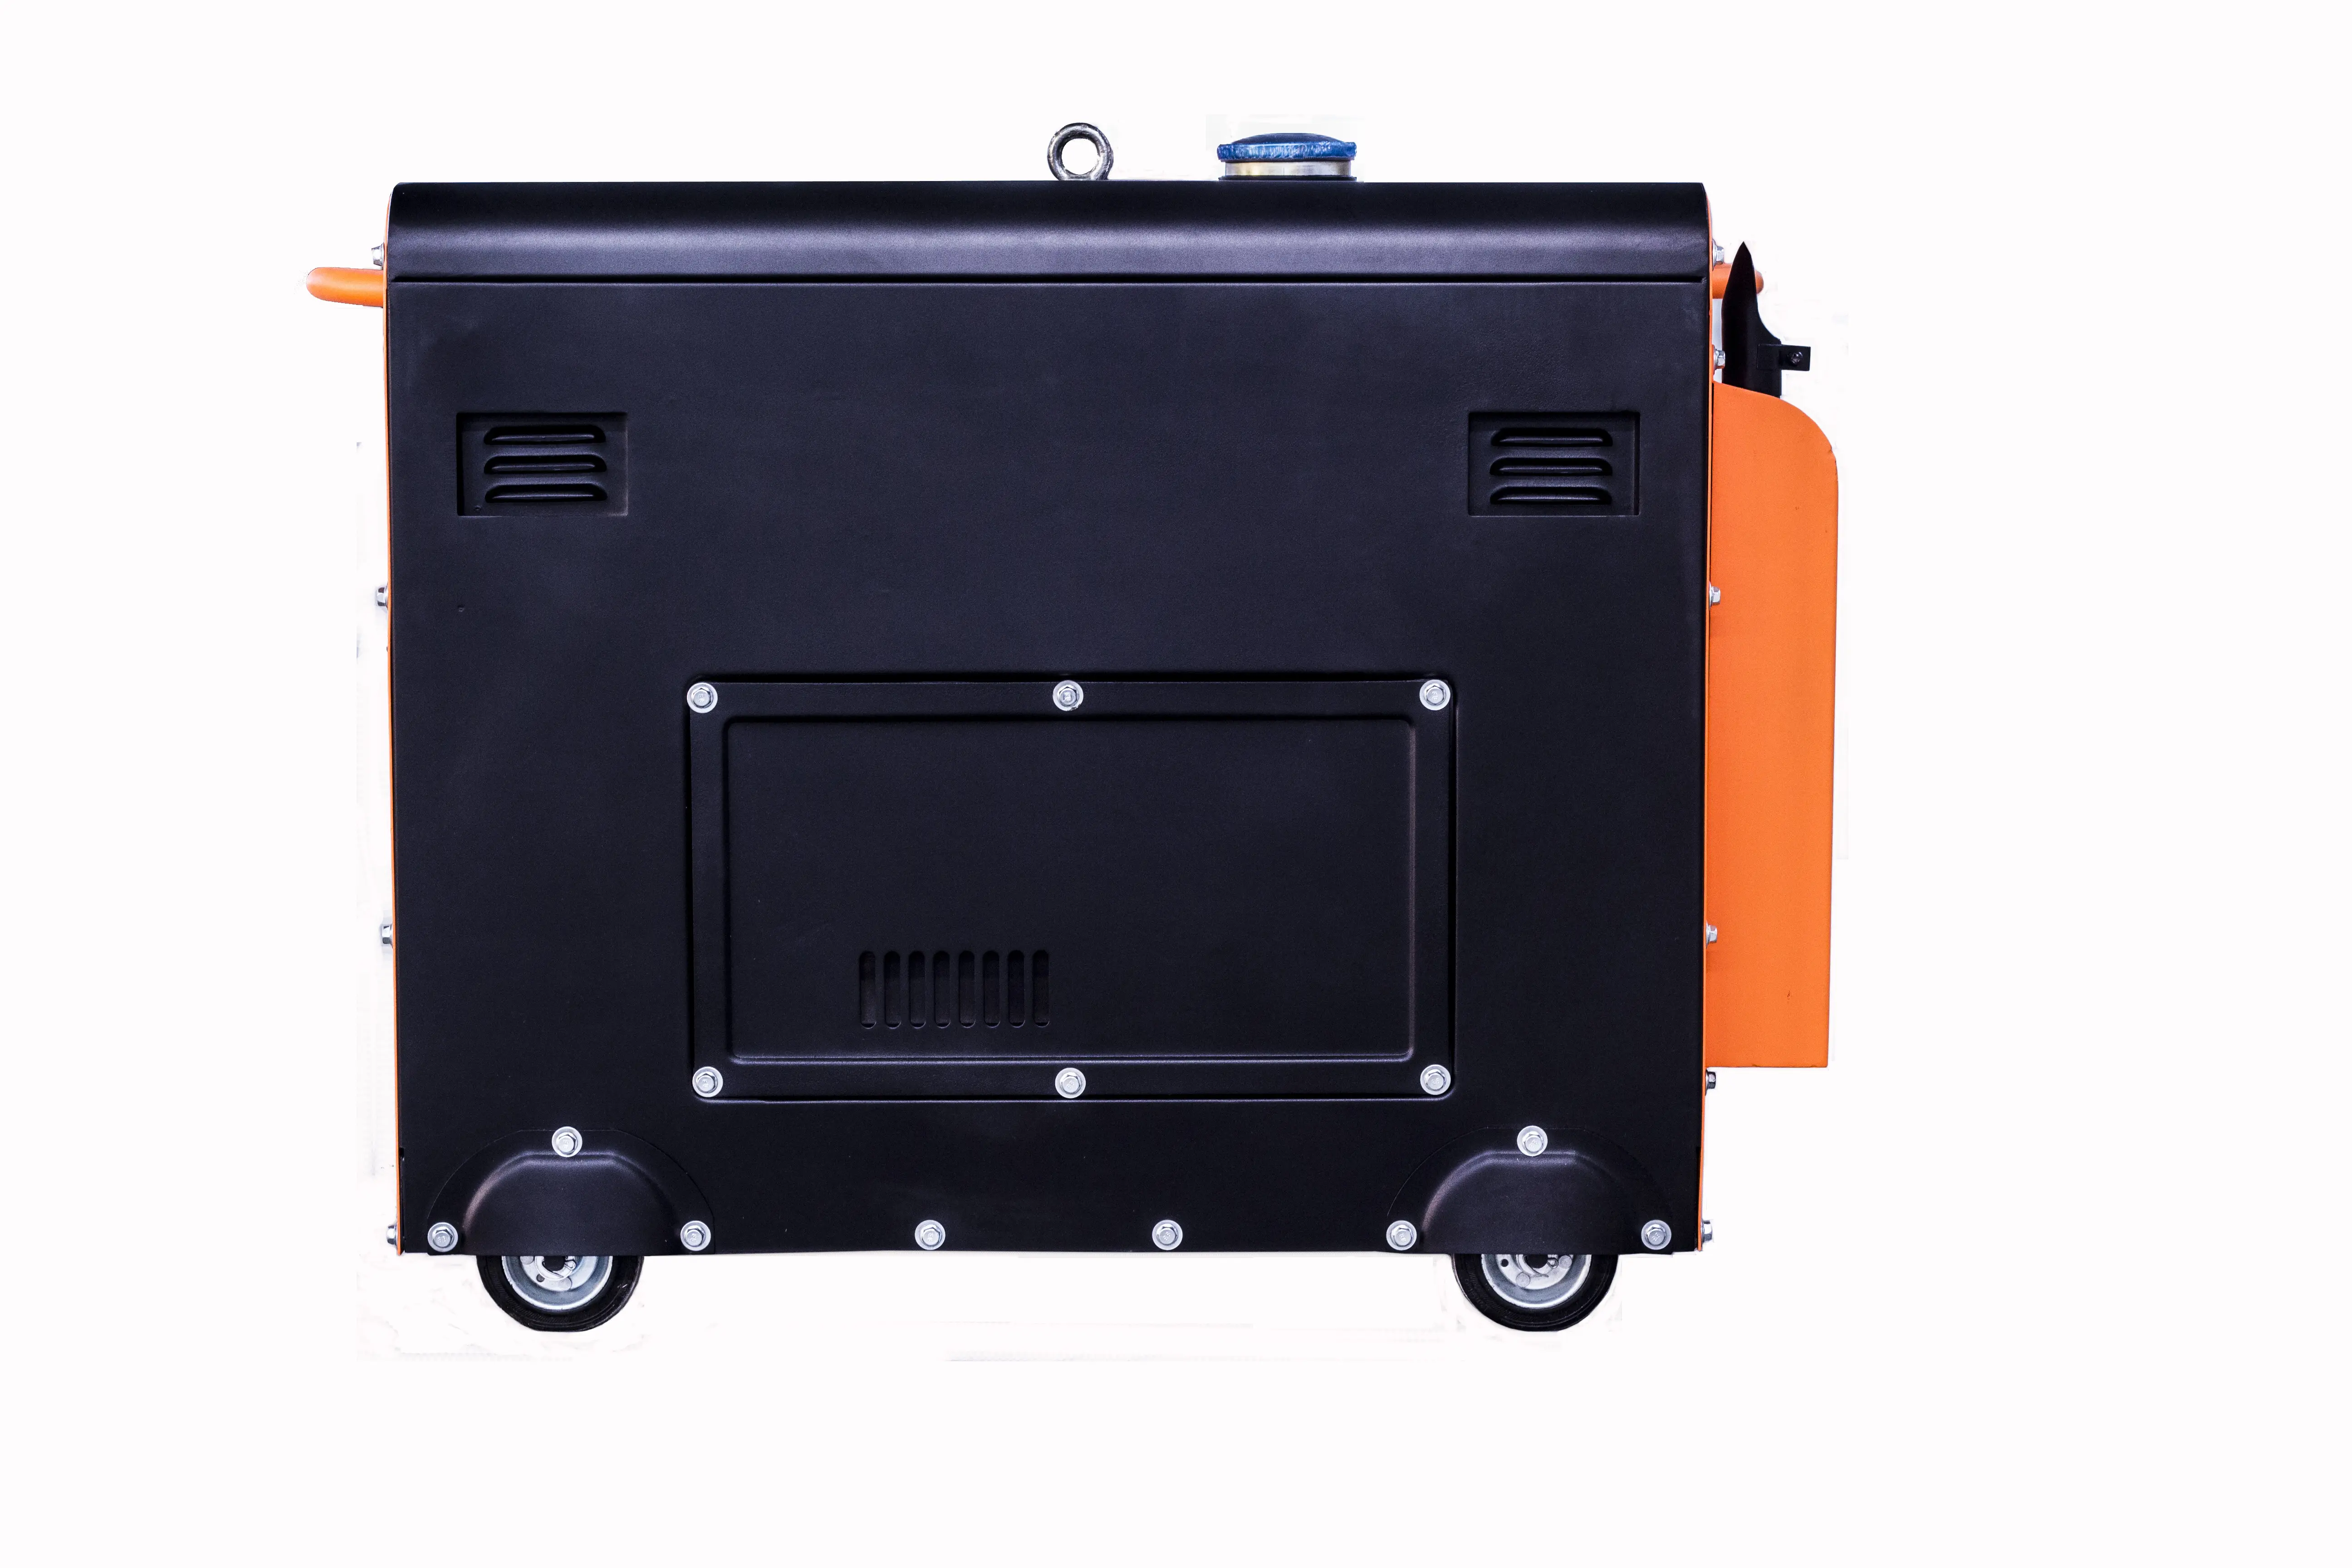 Generator Price 5kw Soundproof Generator Silent Portable Diesel Generator For Home Use Cheap Price 5kva Small Generator Provide Electric Power